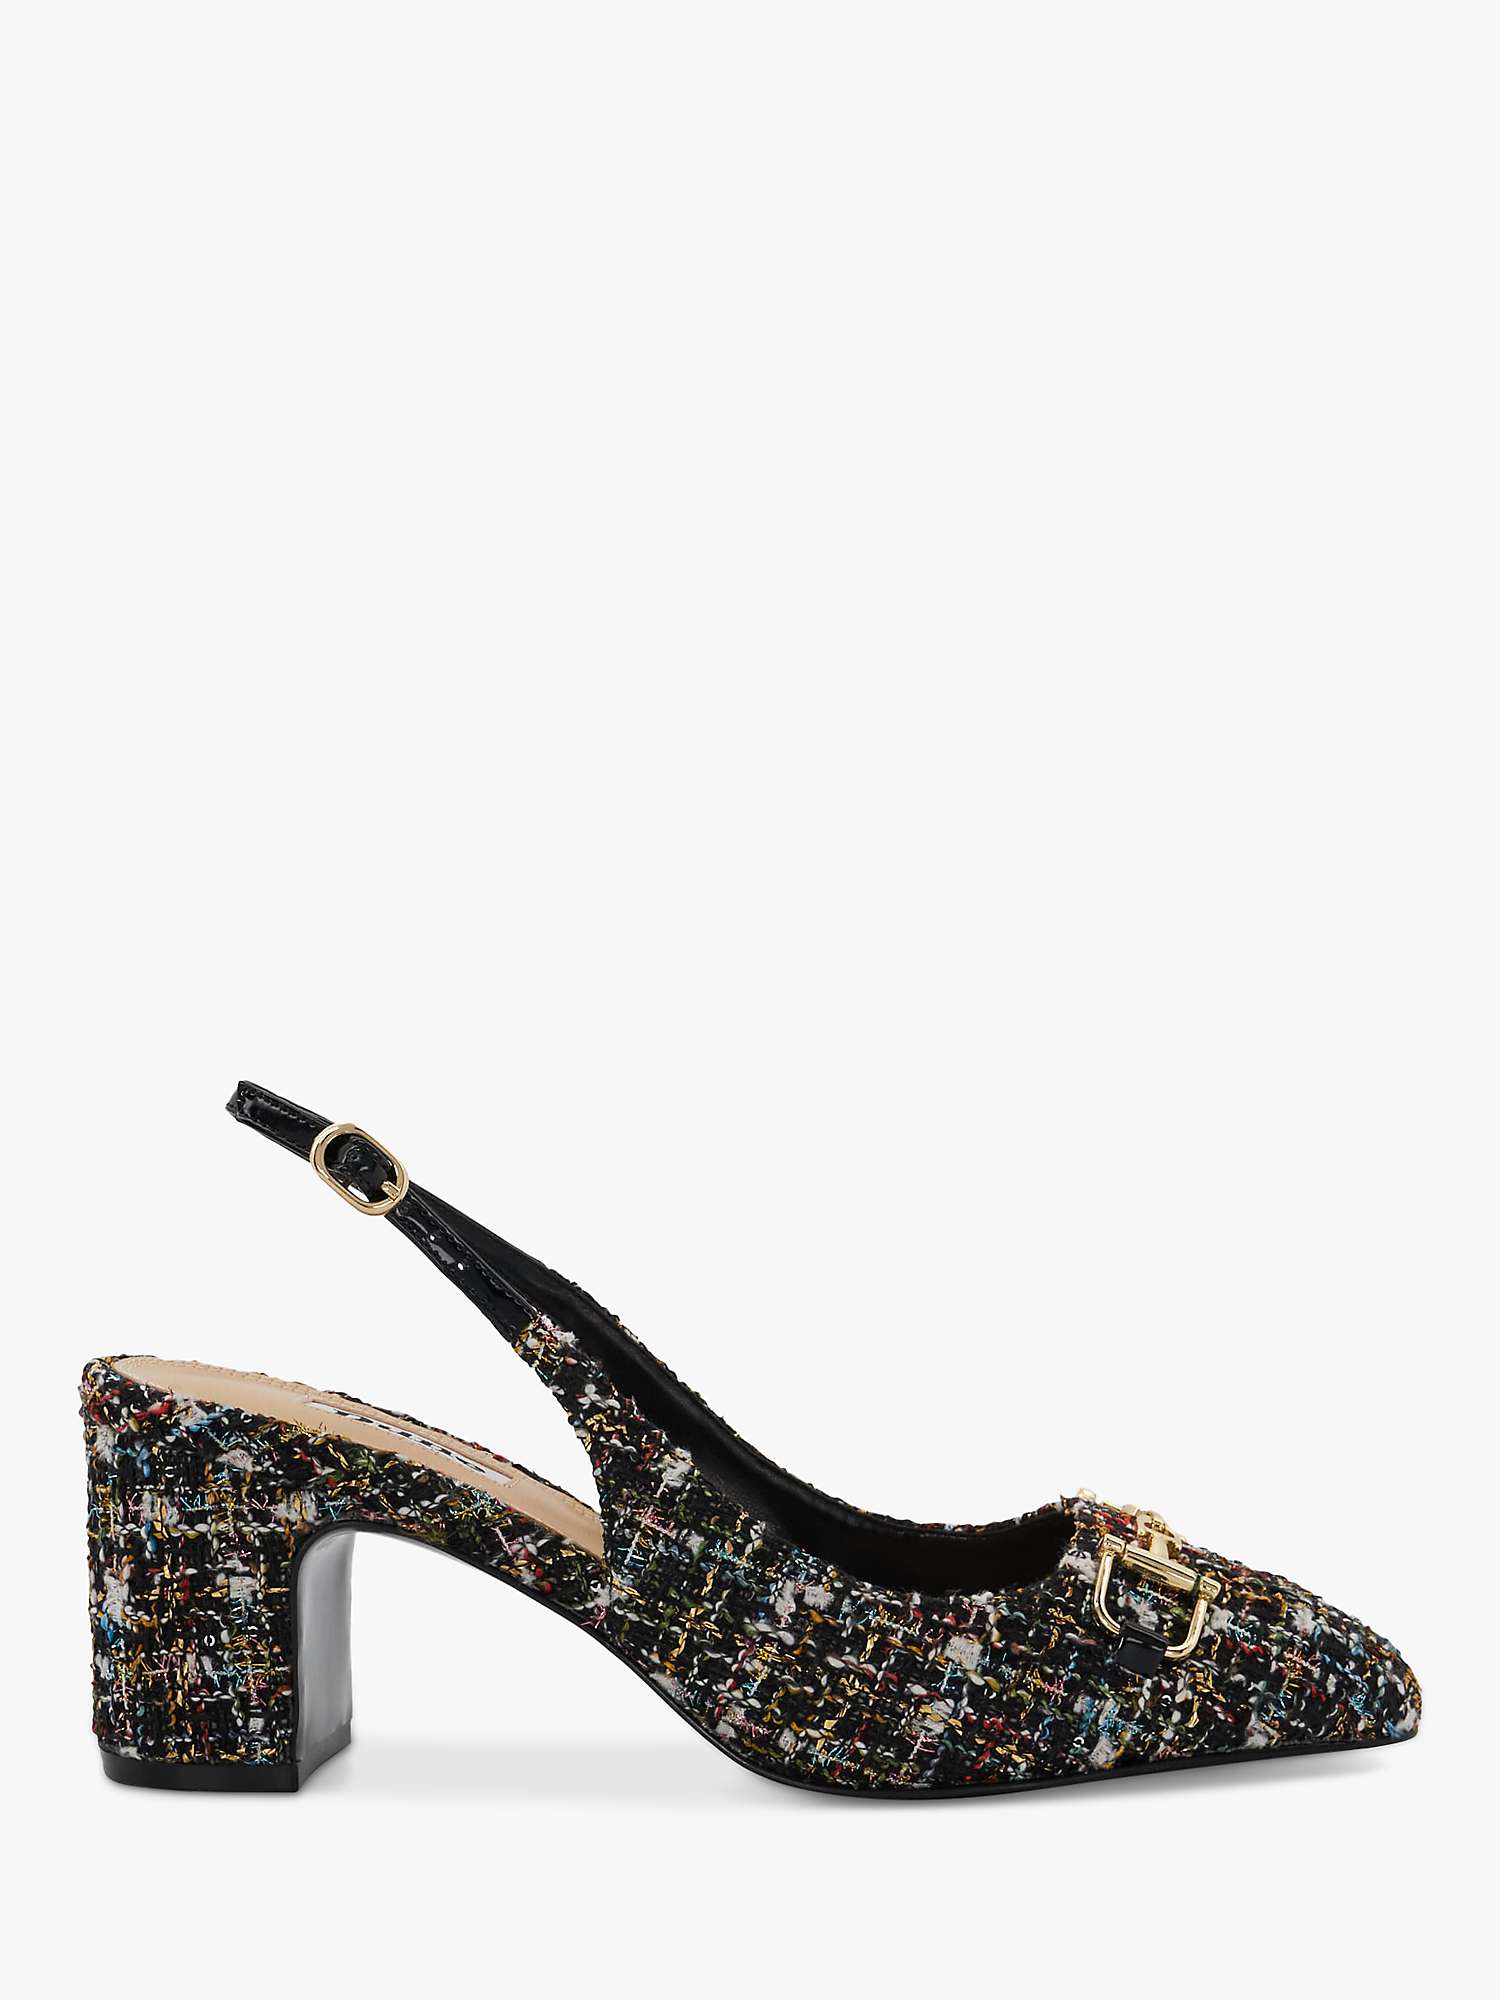 Buy Dune Choices Boucle Block-Heeled Slingback Online at johnlewis.com